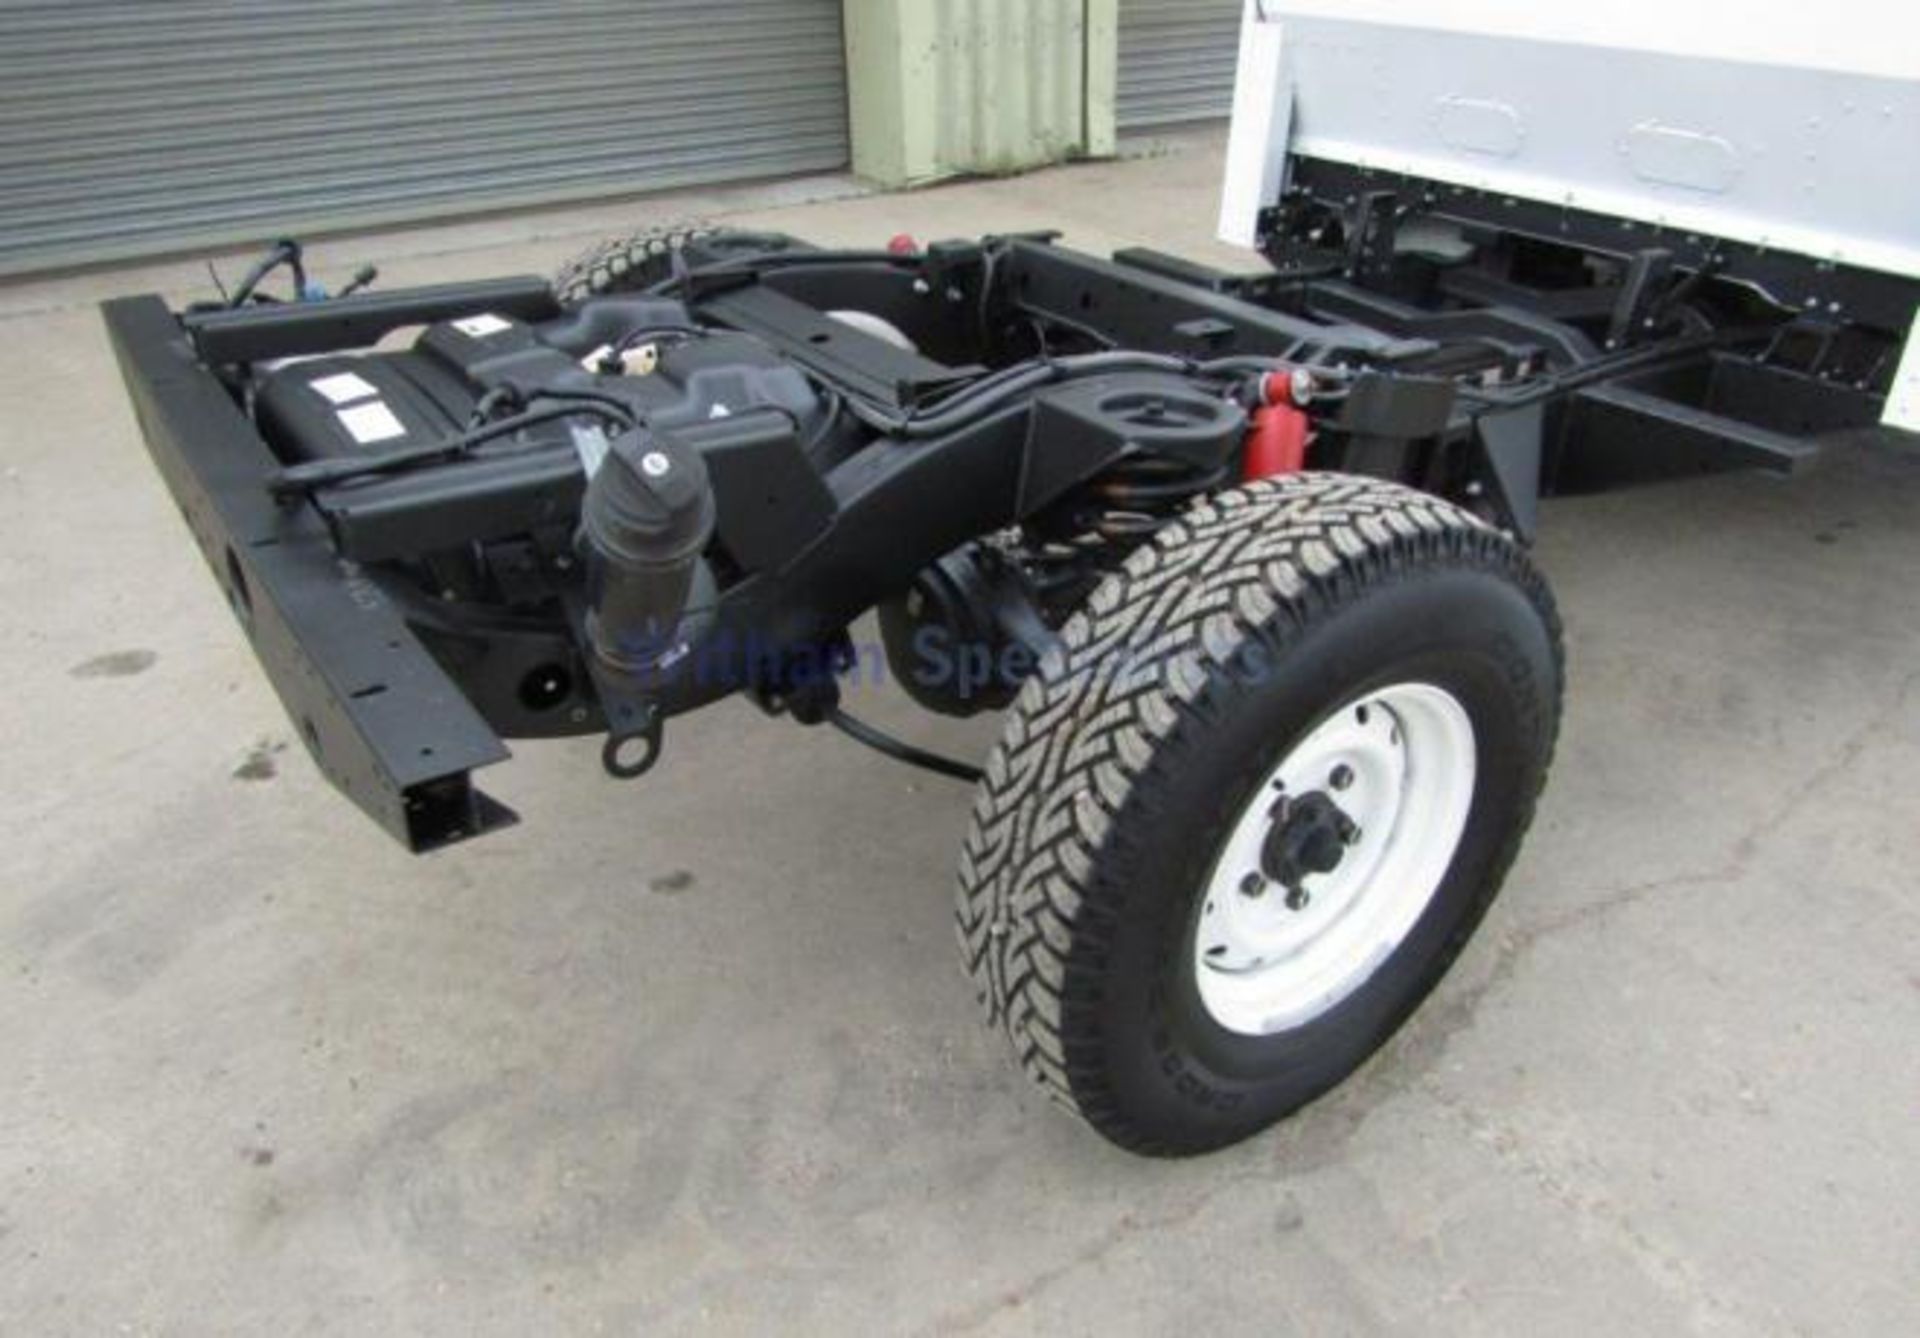 NEW UNUSED Export Specification Land Rover Defender Armoured 130 Chassis Cab - Bild 10 aus 19